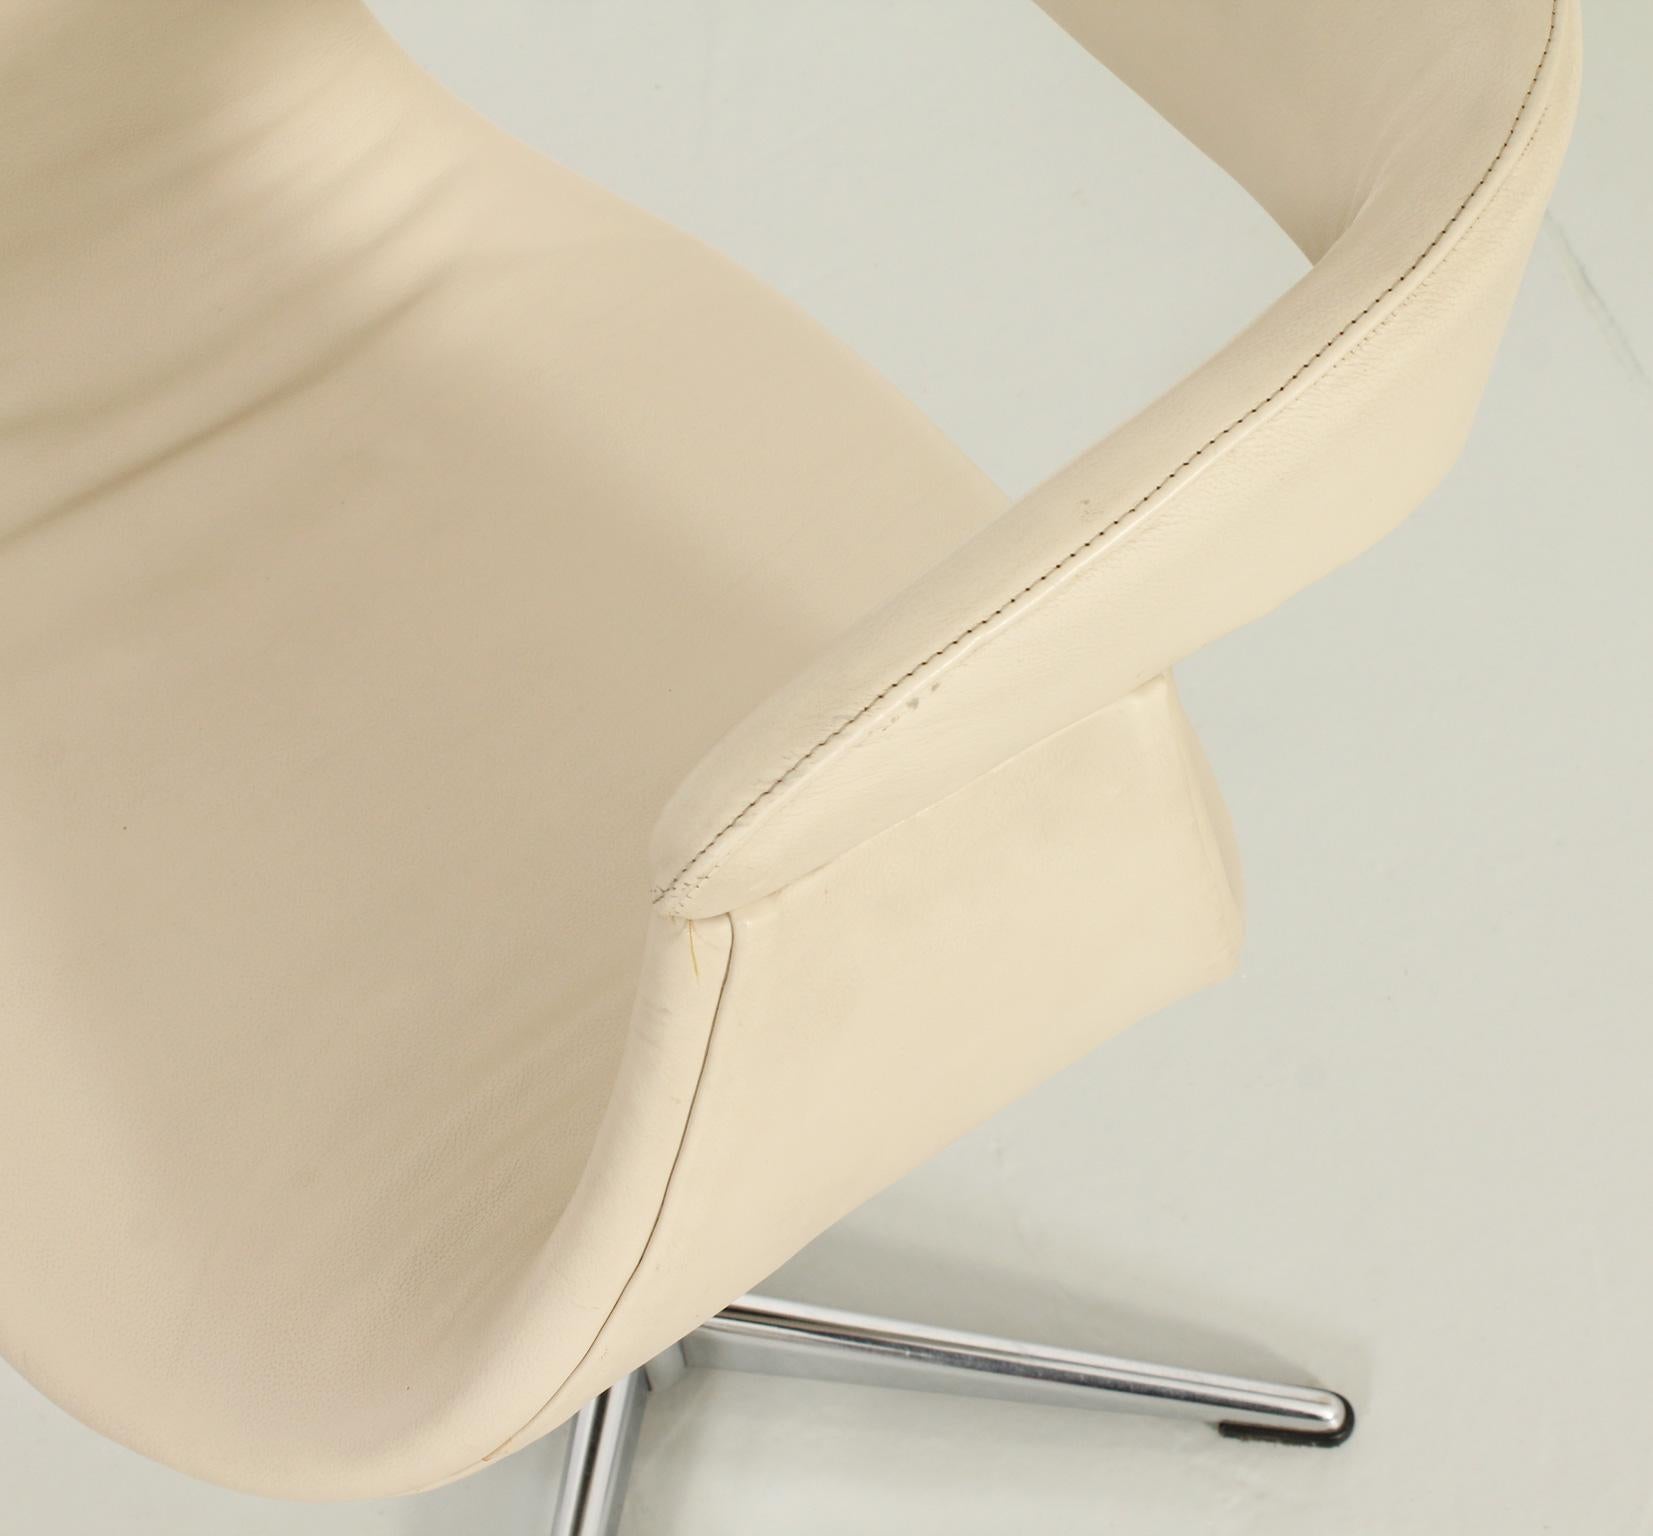 Metal Office Swivel Chair in Cream Leather, France, 1960's For Sale